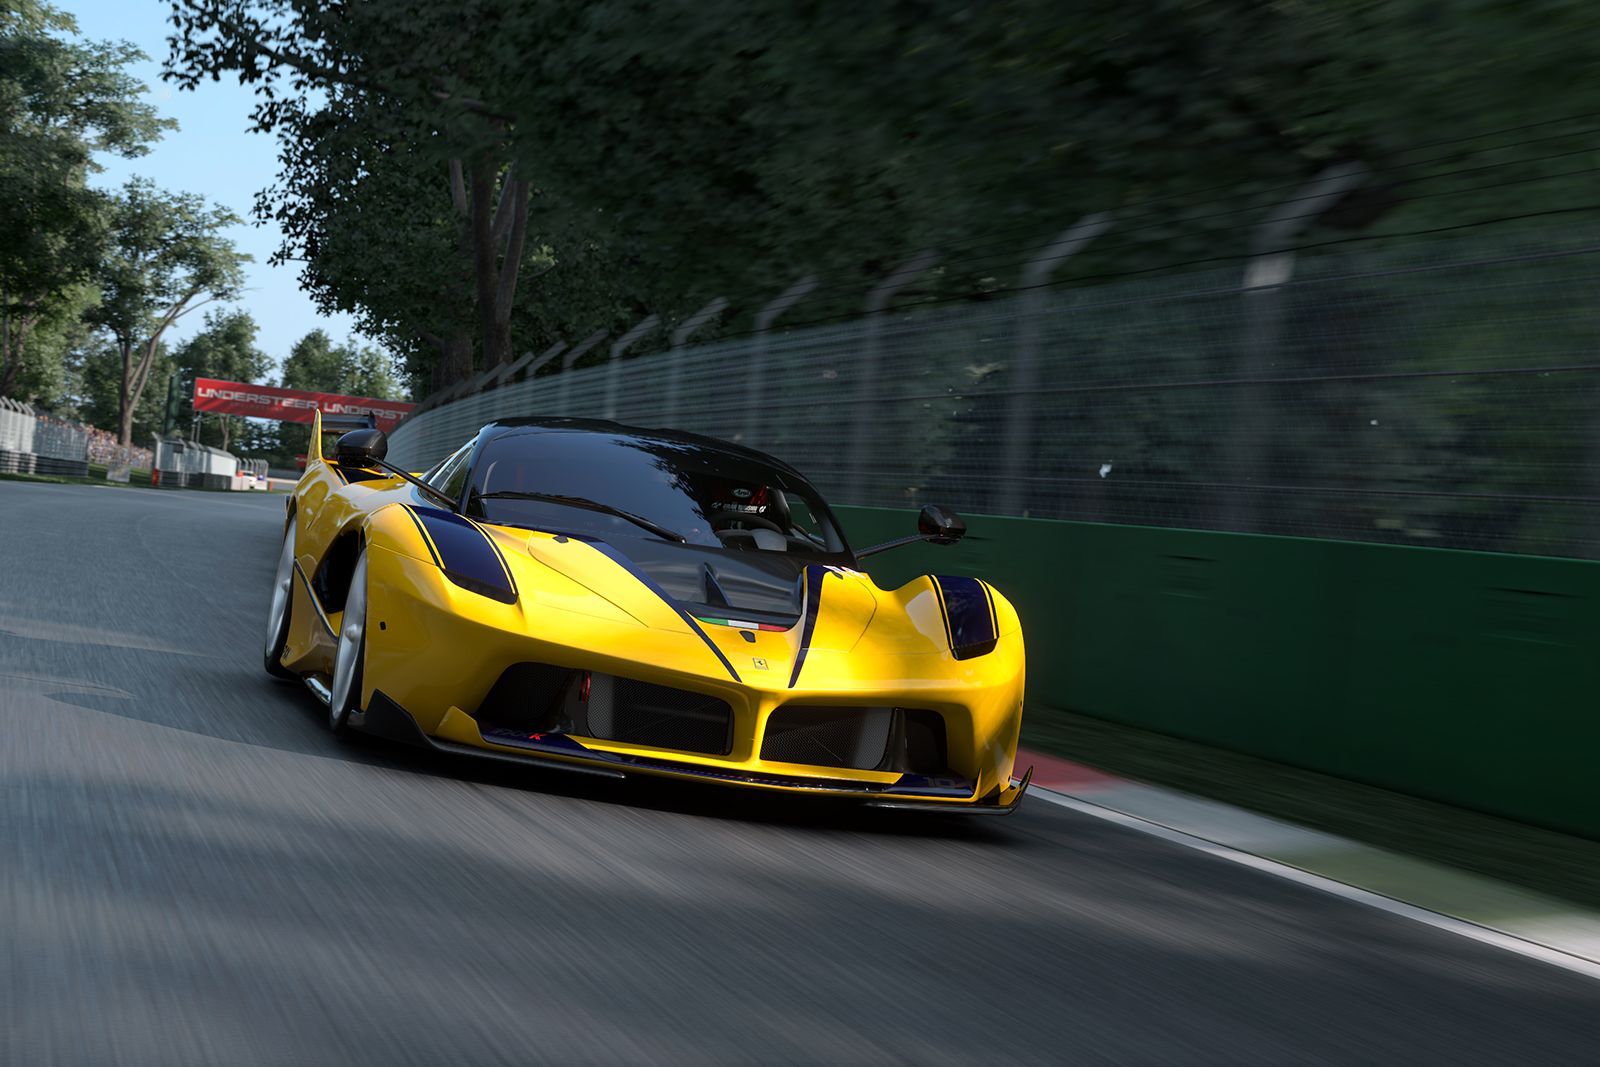 Gran Turismo 7 tips and tricks: Get started with this detailed racing game photo 4